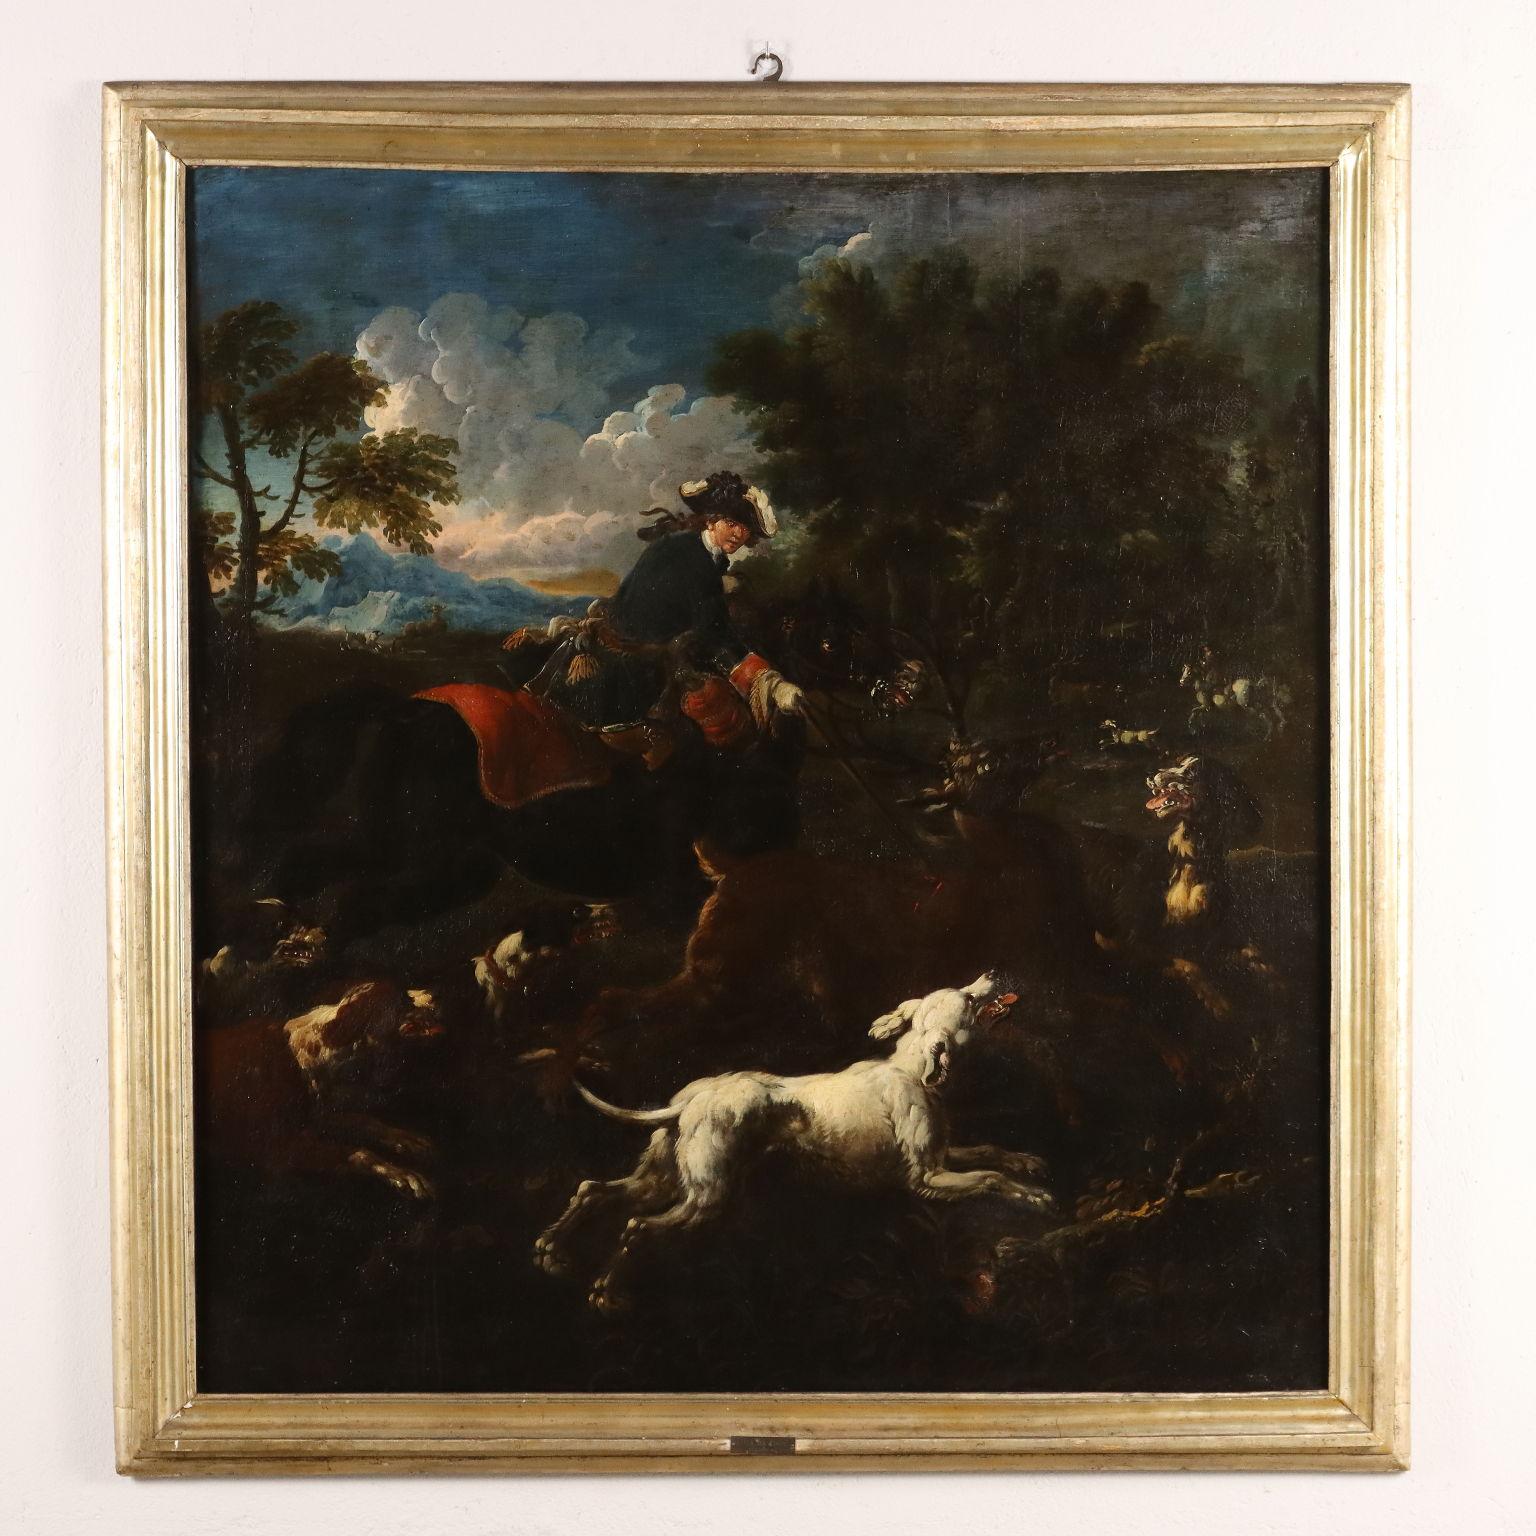 Hunting Scene, 18th century - Other Art Style Painting by Philipp Peter Roos (Rosa di Tivoli)